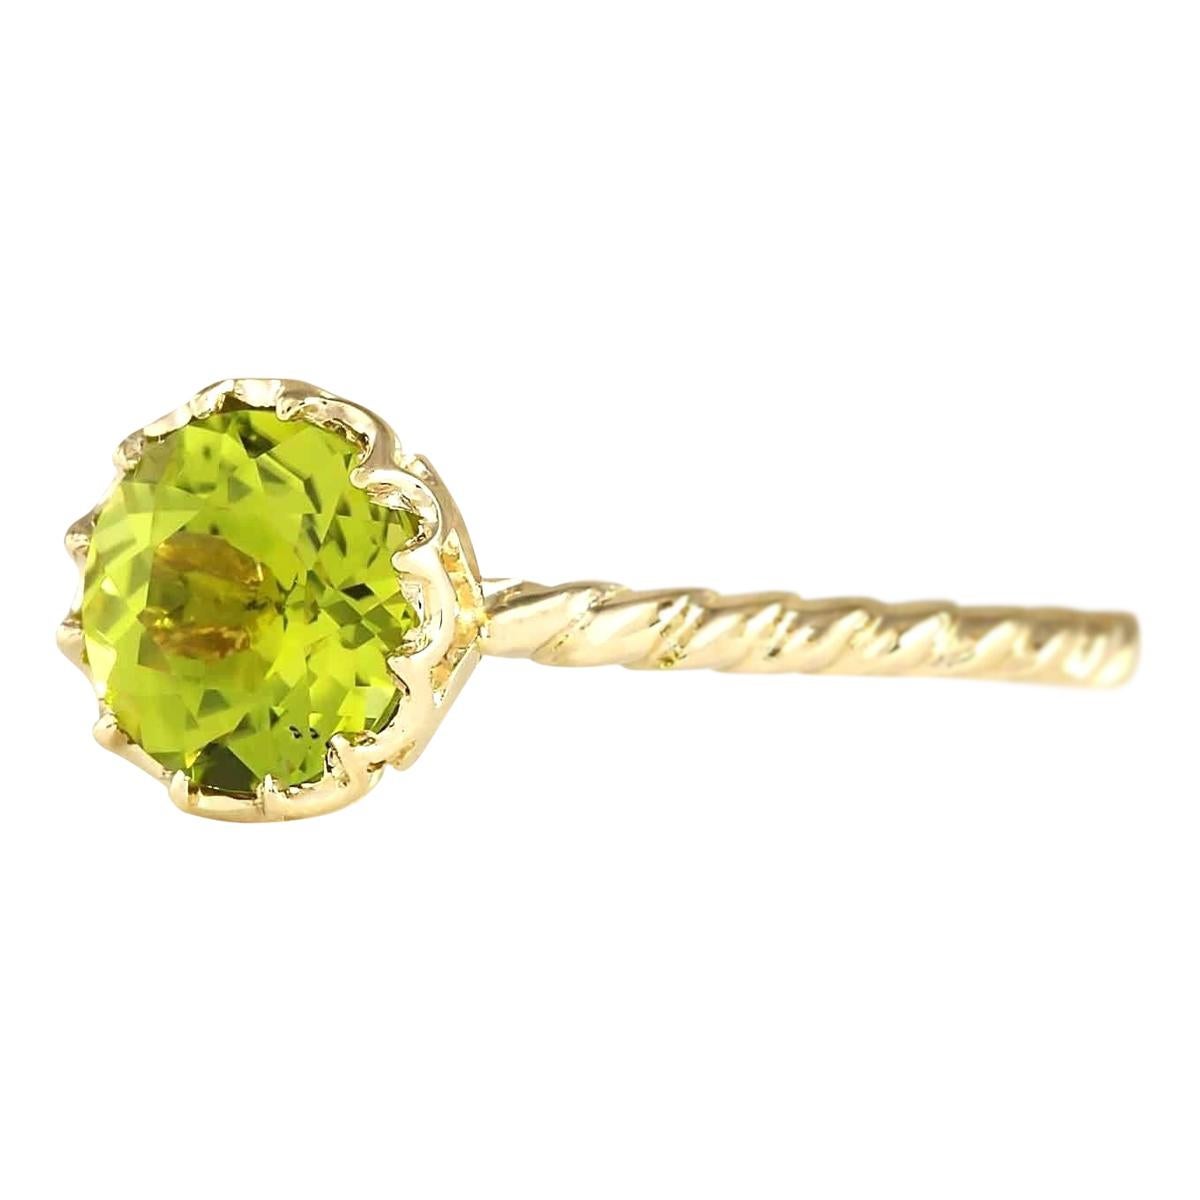 Stamped: 14K Yellow Gold
Total Ring Weight: 1.8 Grams
Total Natural Peridot Weight is 1.50 Carat
Color: Green
Face Measures: 7.00x7.00 mm
Sku: [703264W]